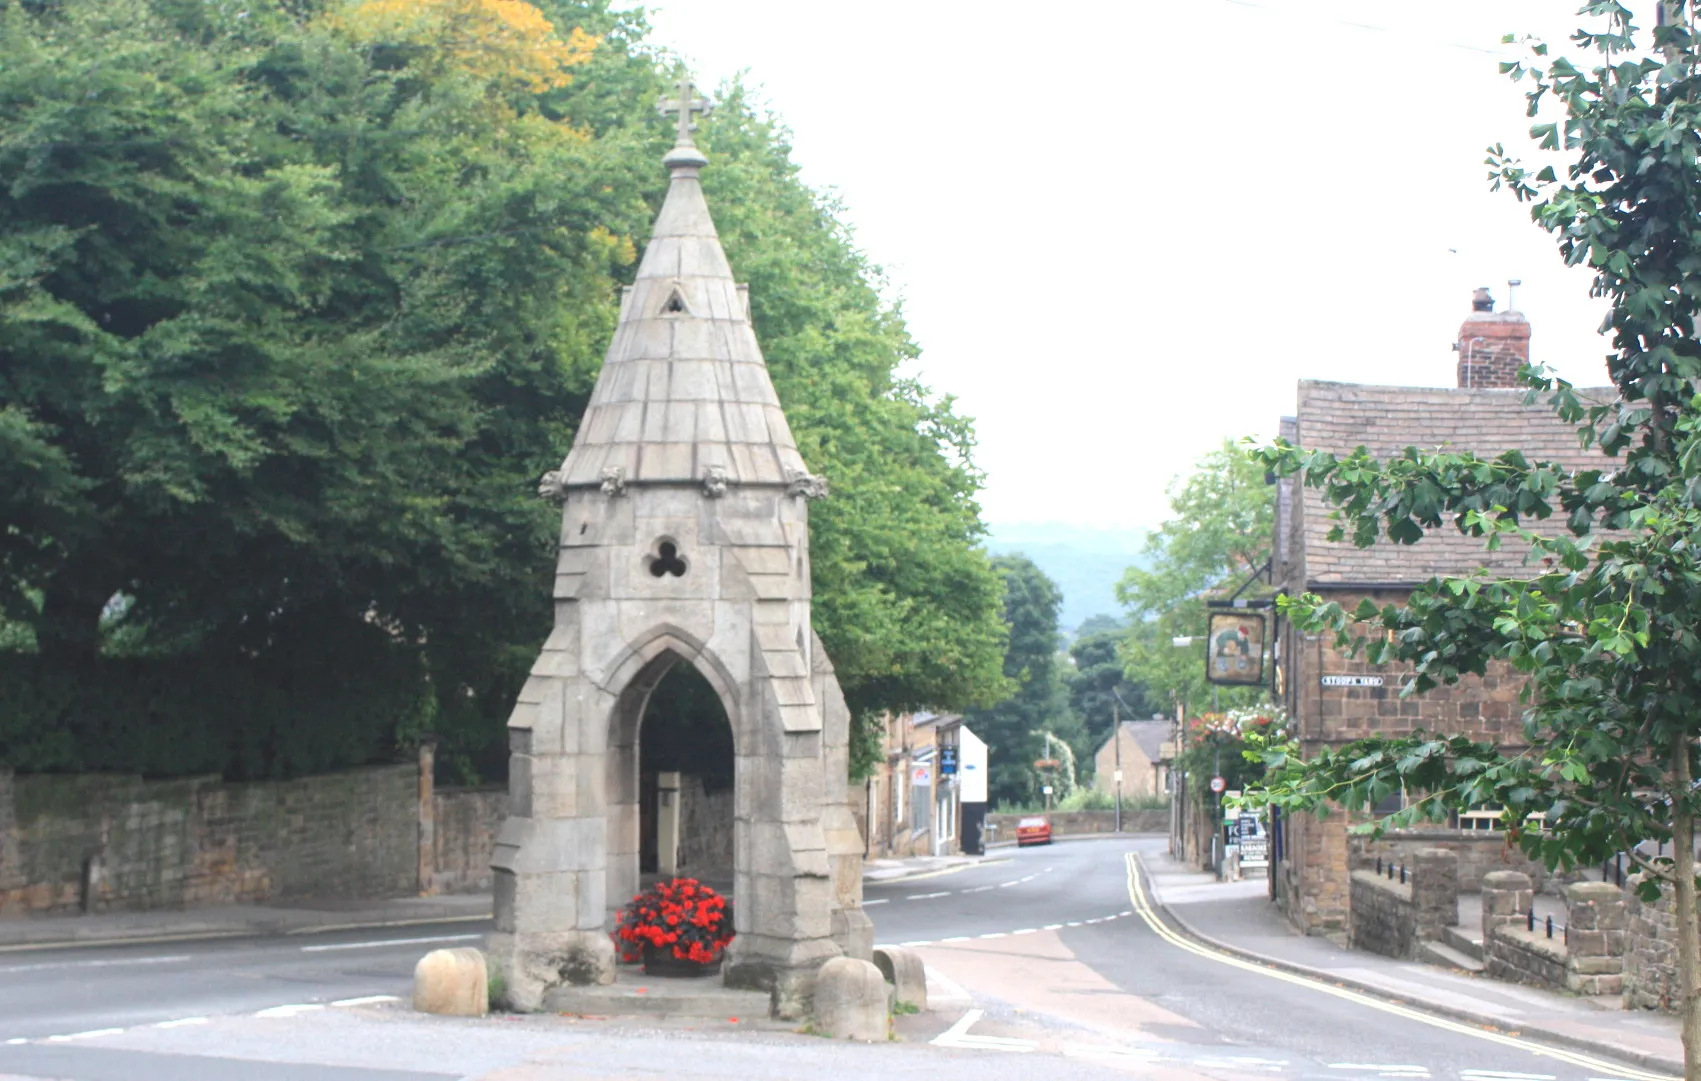 Photo showing: The Peel Monument in Dronfield, Derbyshire, England